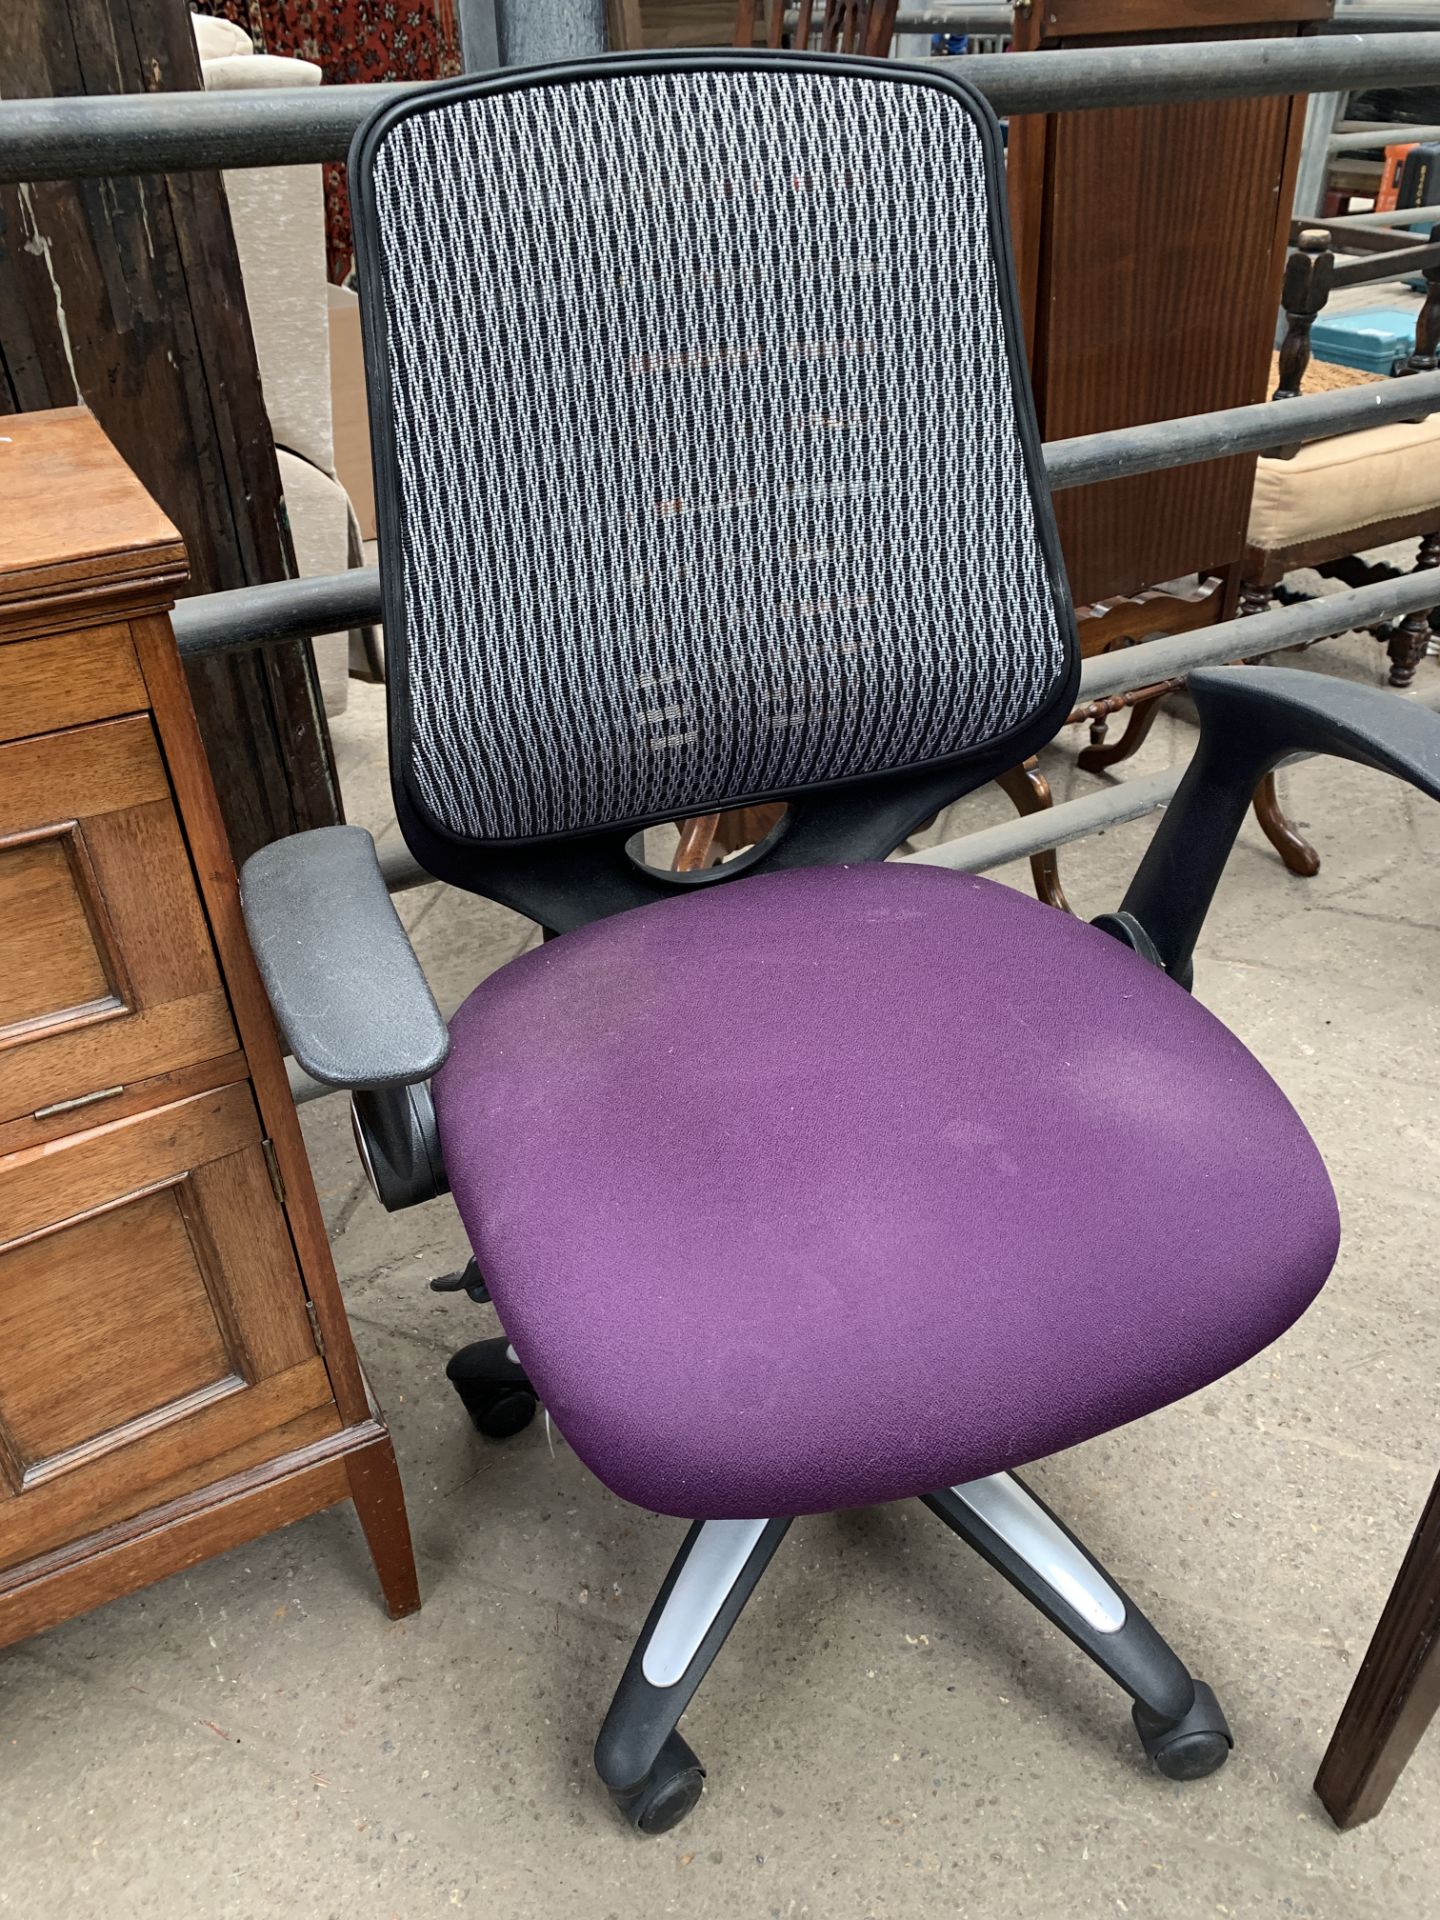 Height adjustable office chair - Image 3 of 4